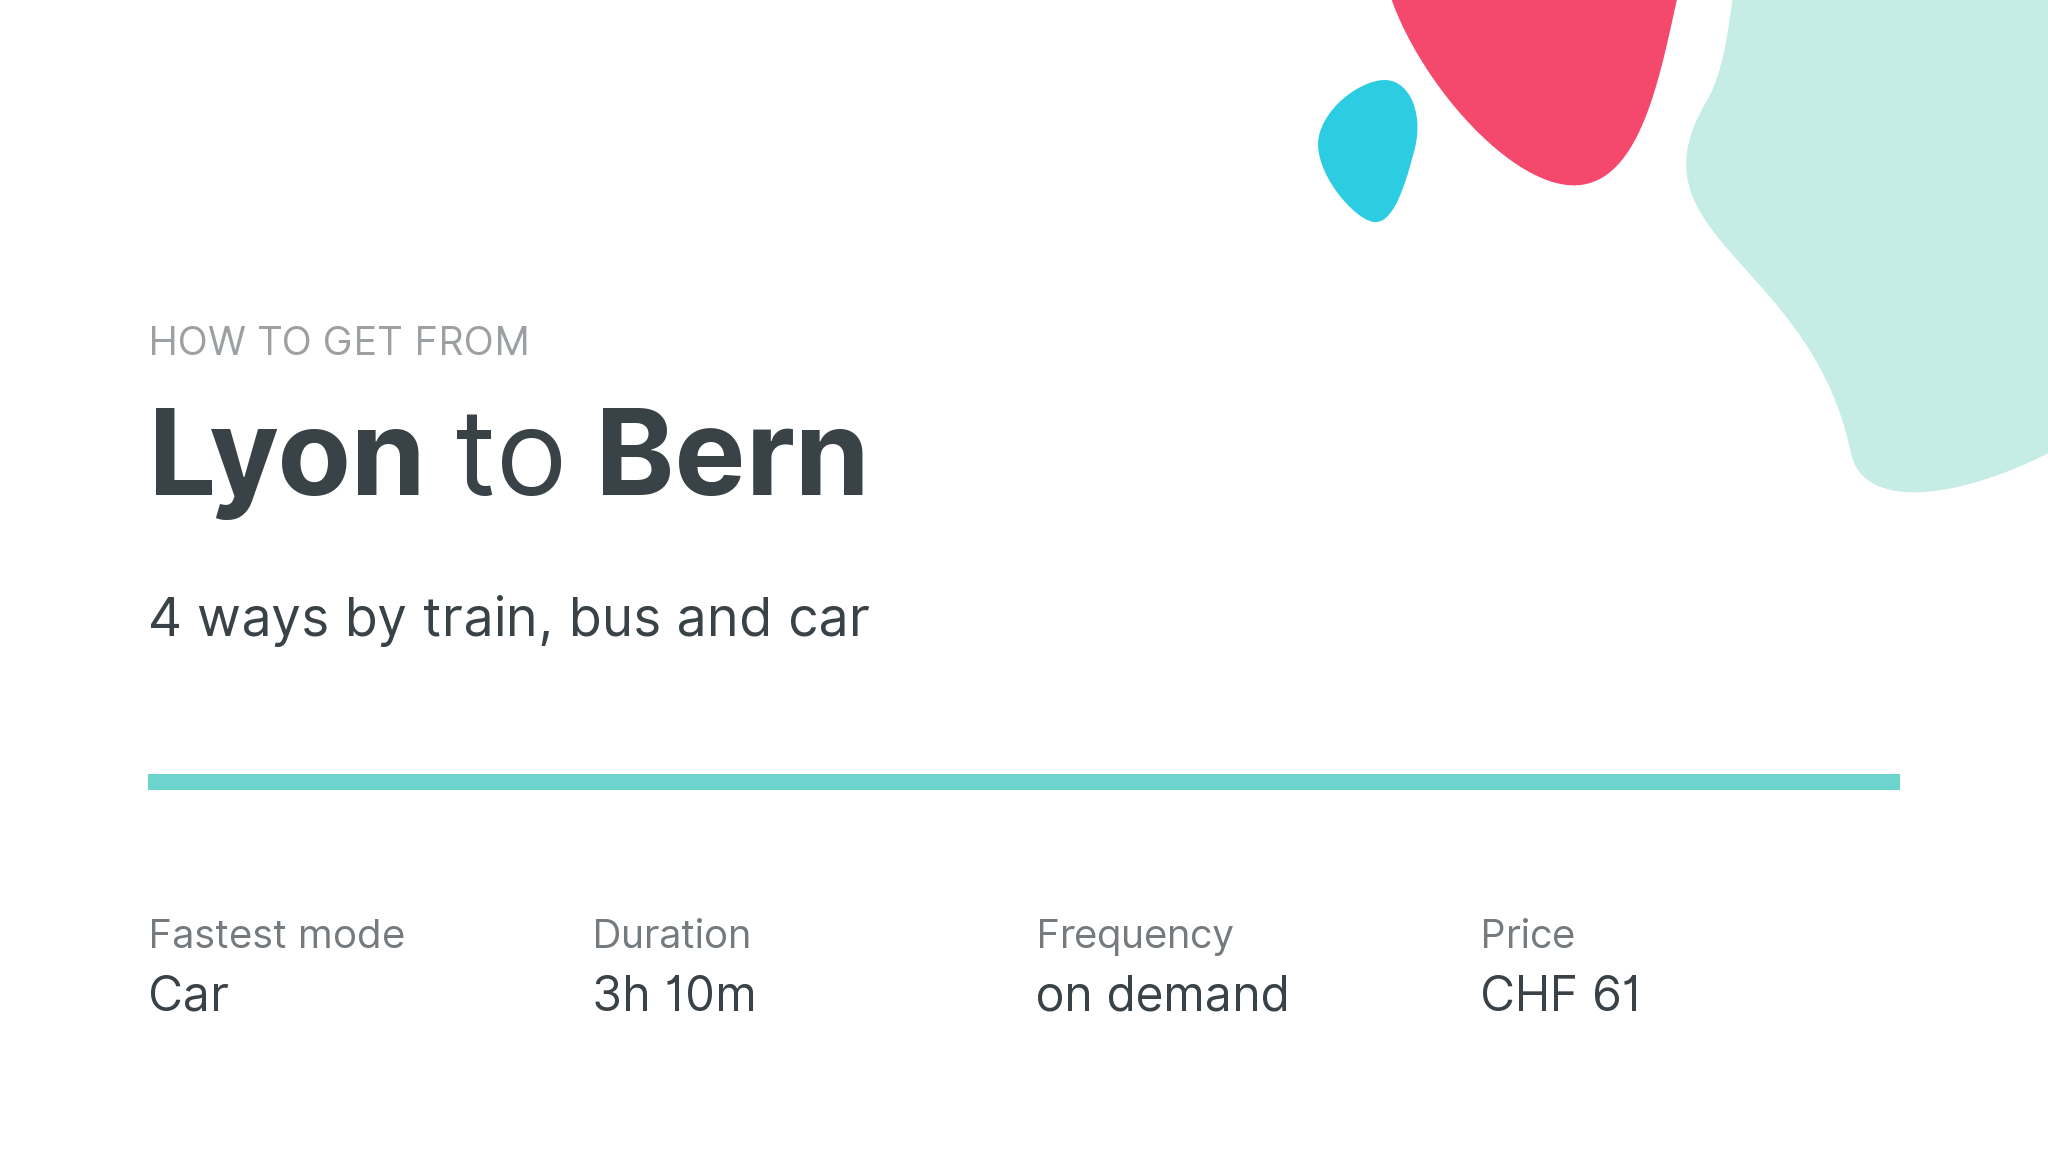 How do I get from Lyon to Bern